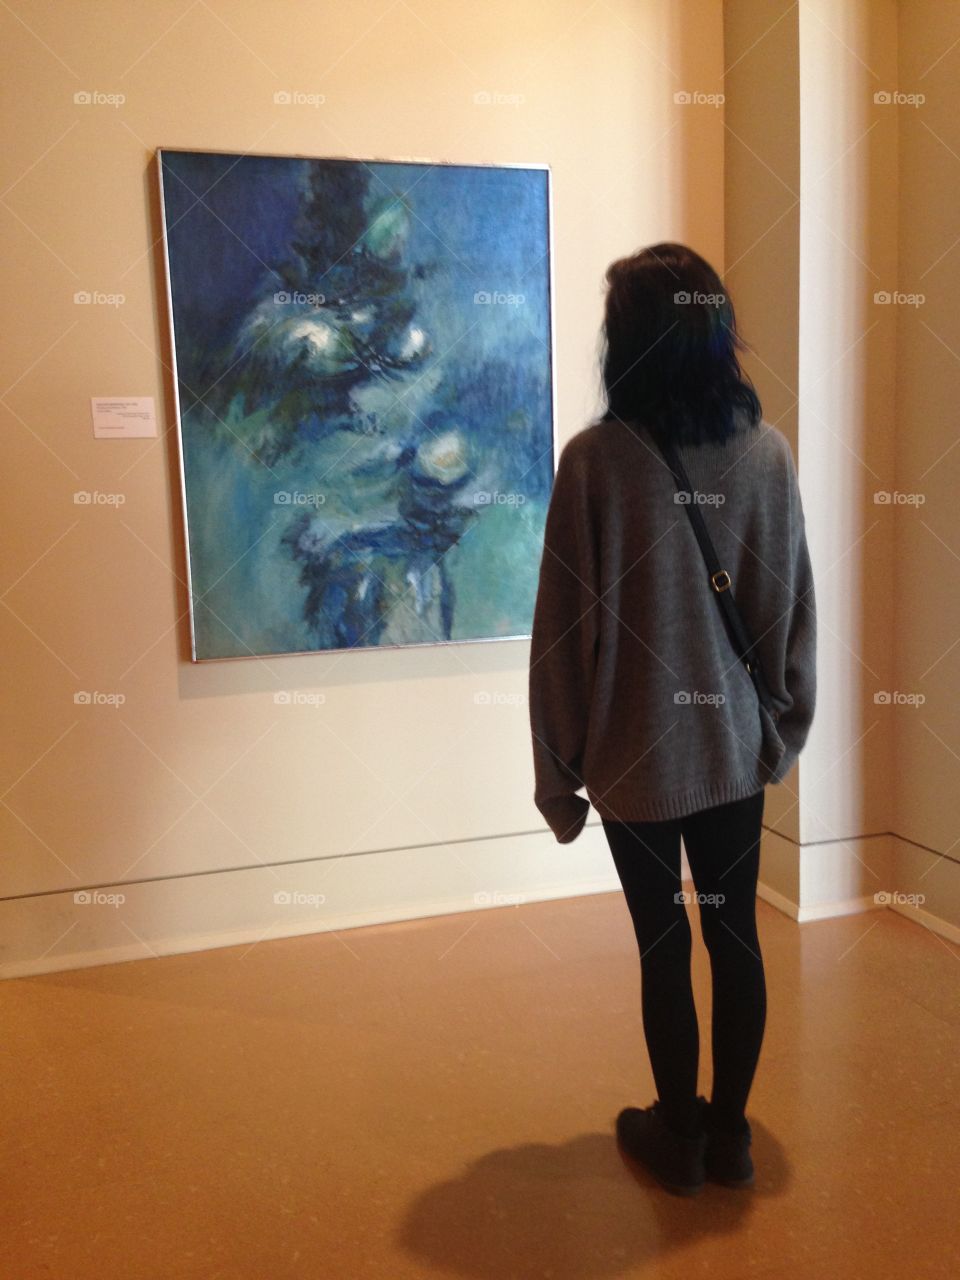 checking out the paintings!